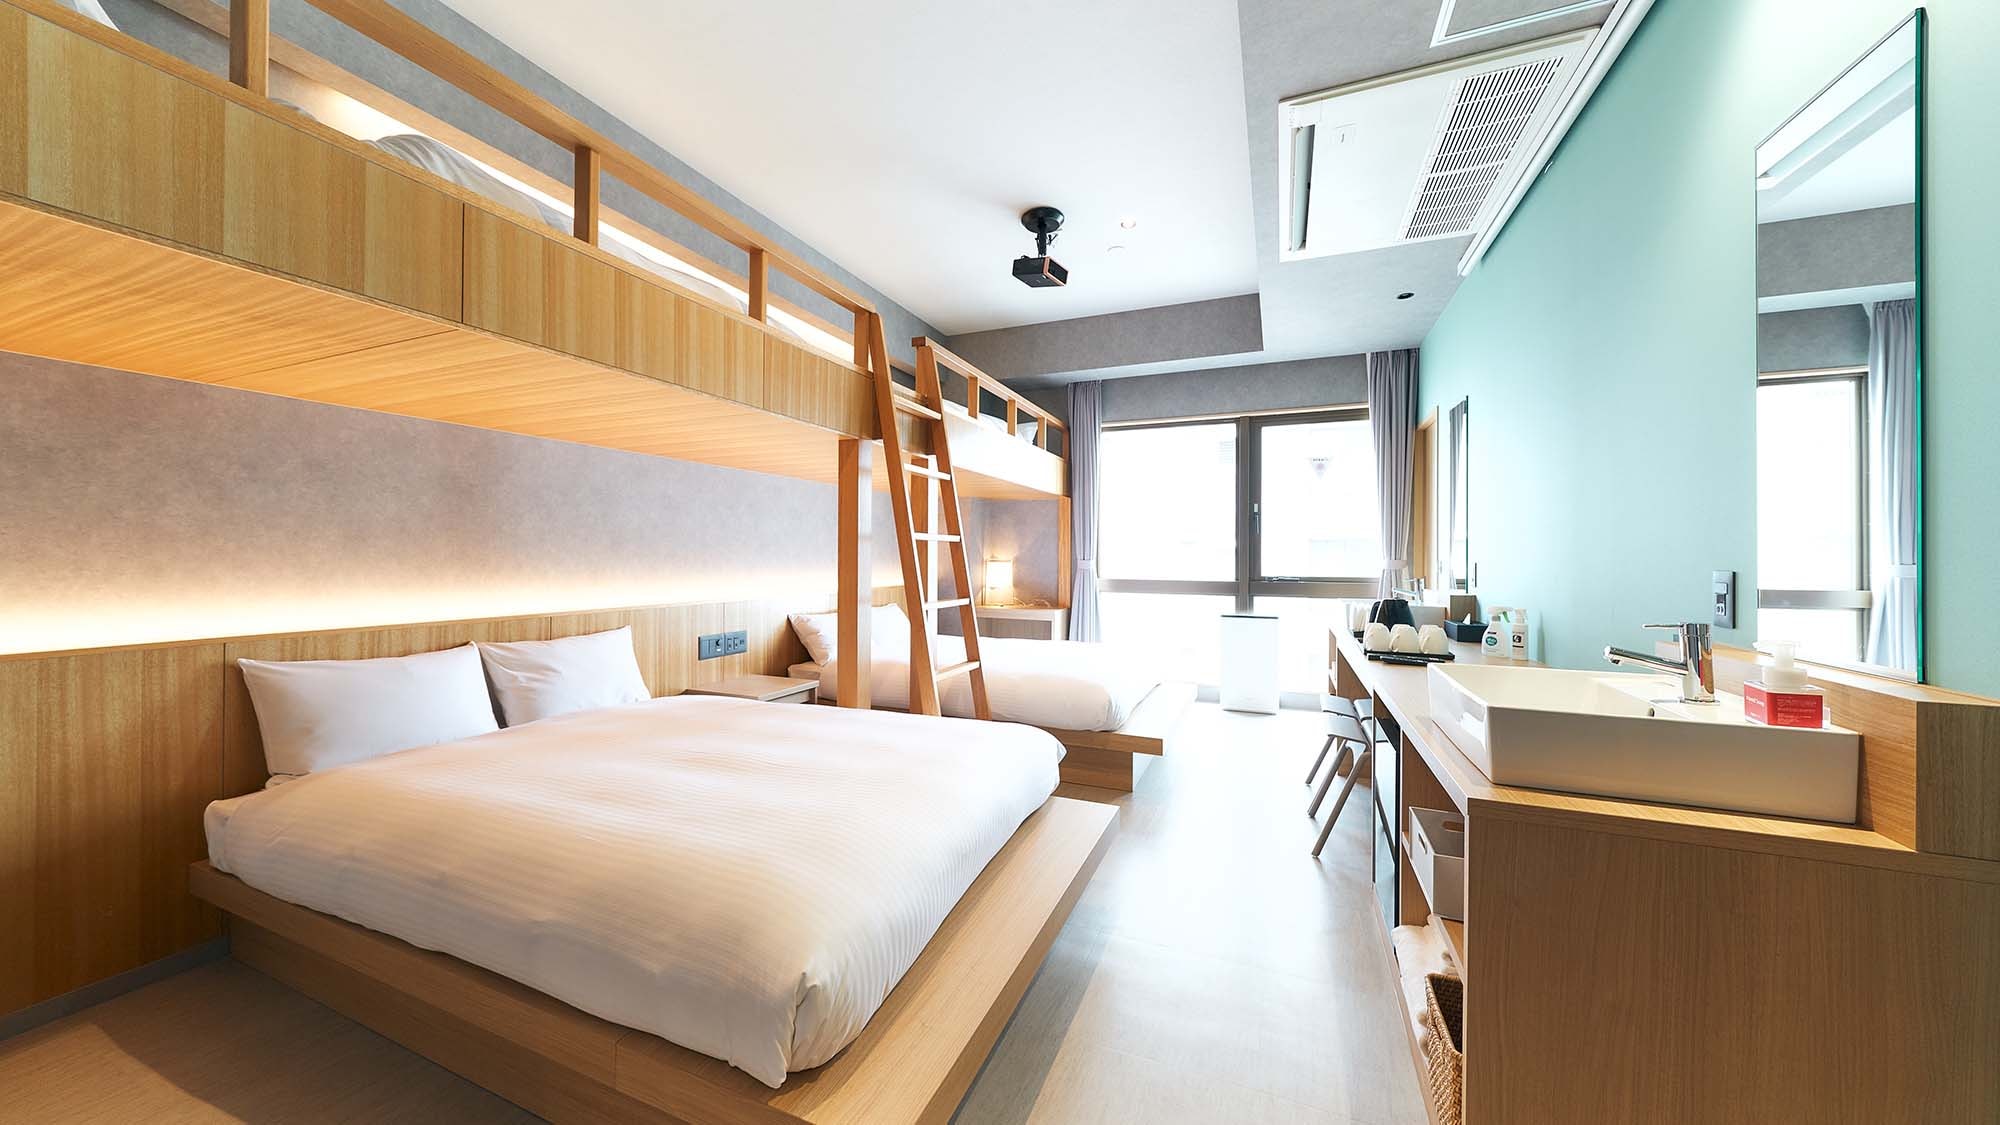 ・ Bunk bed room / Room based on refreshing green is a spacious design of 28 square meters!